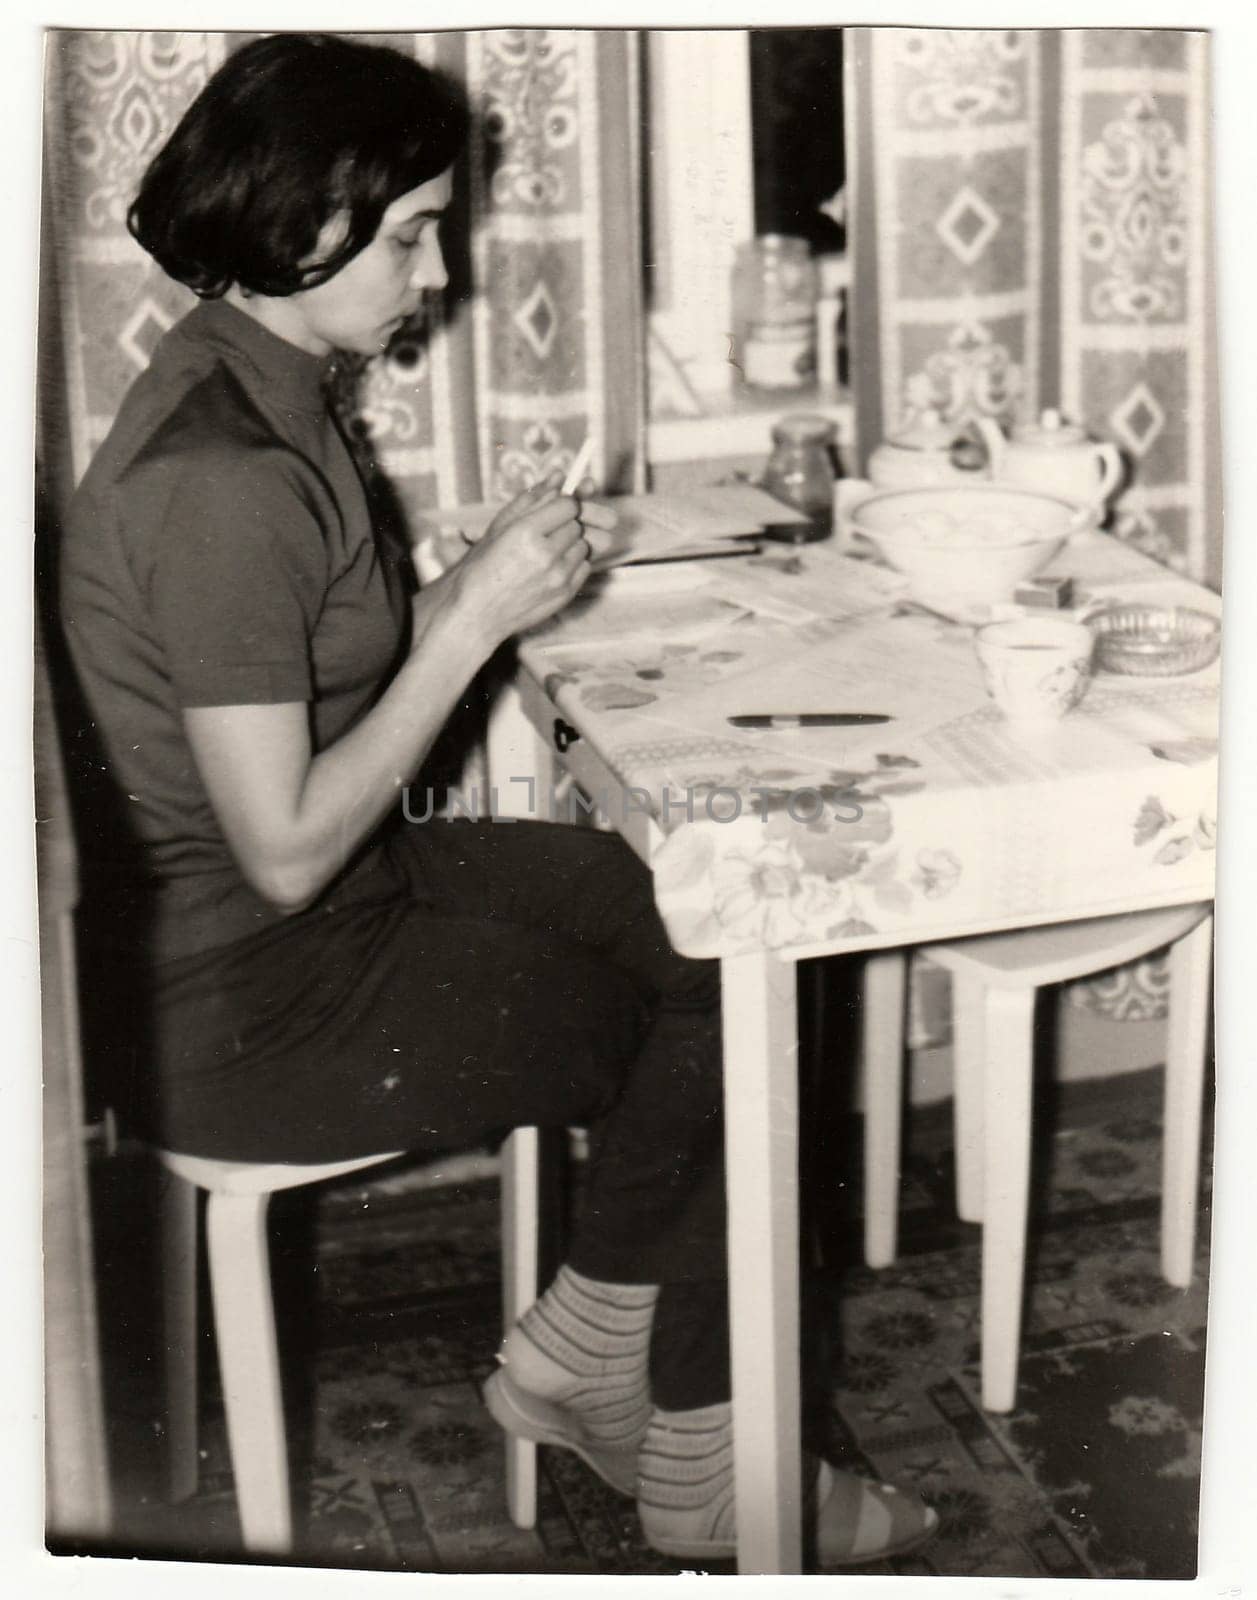 Vintage photo shows woman sittting at the table. by roman_nerud